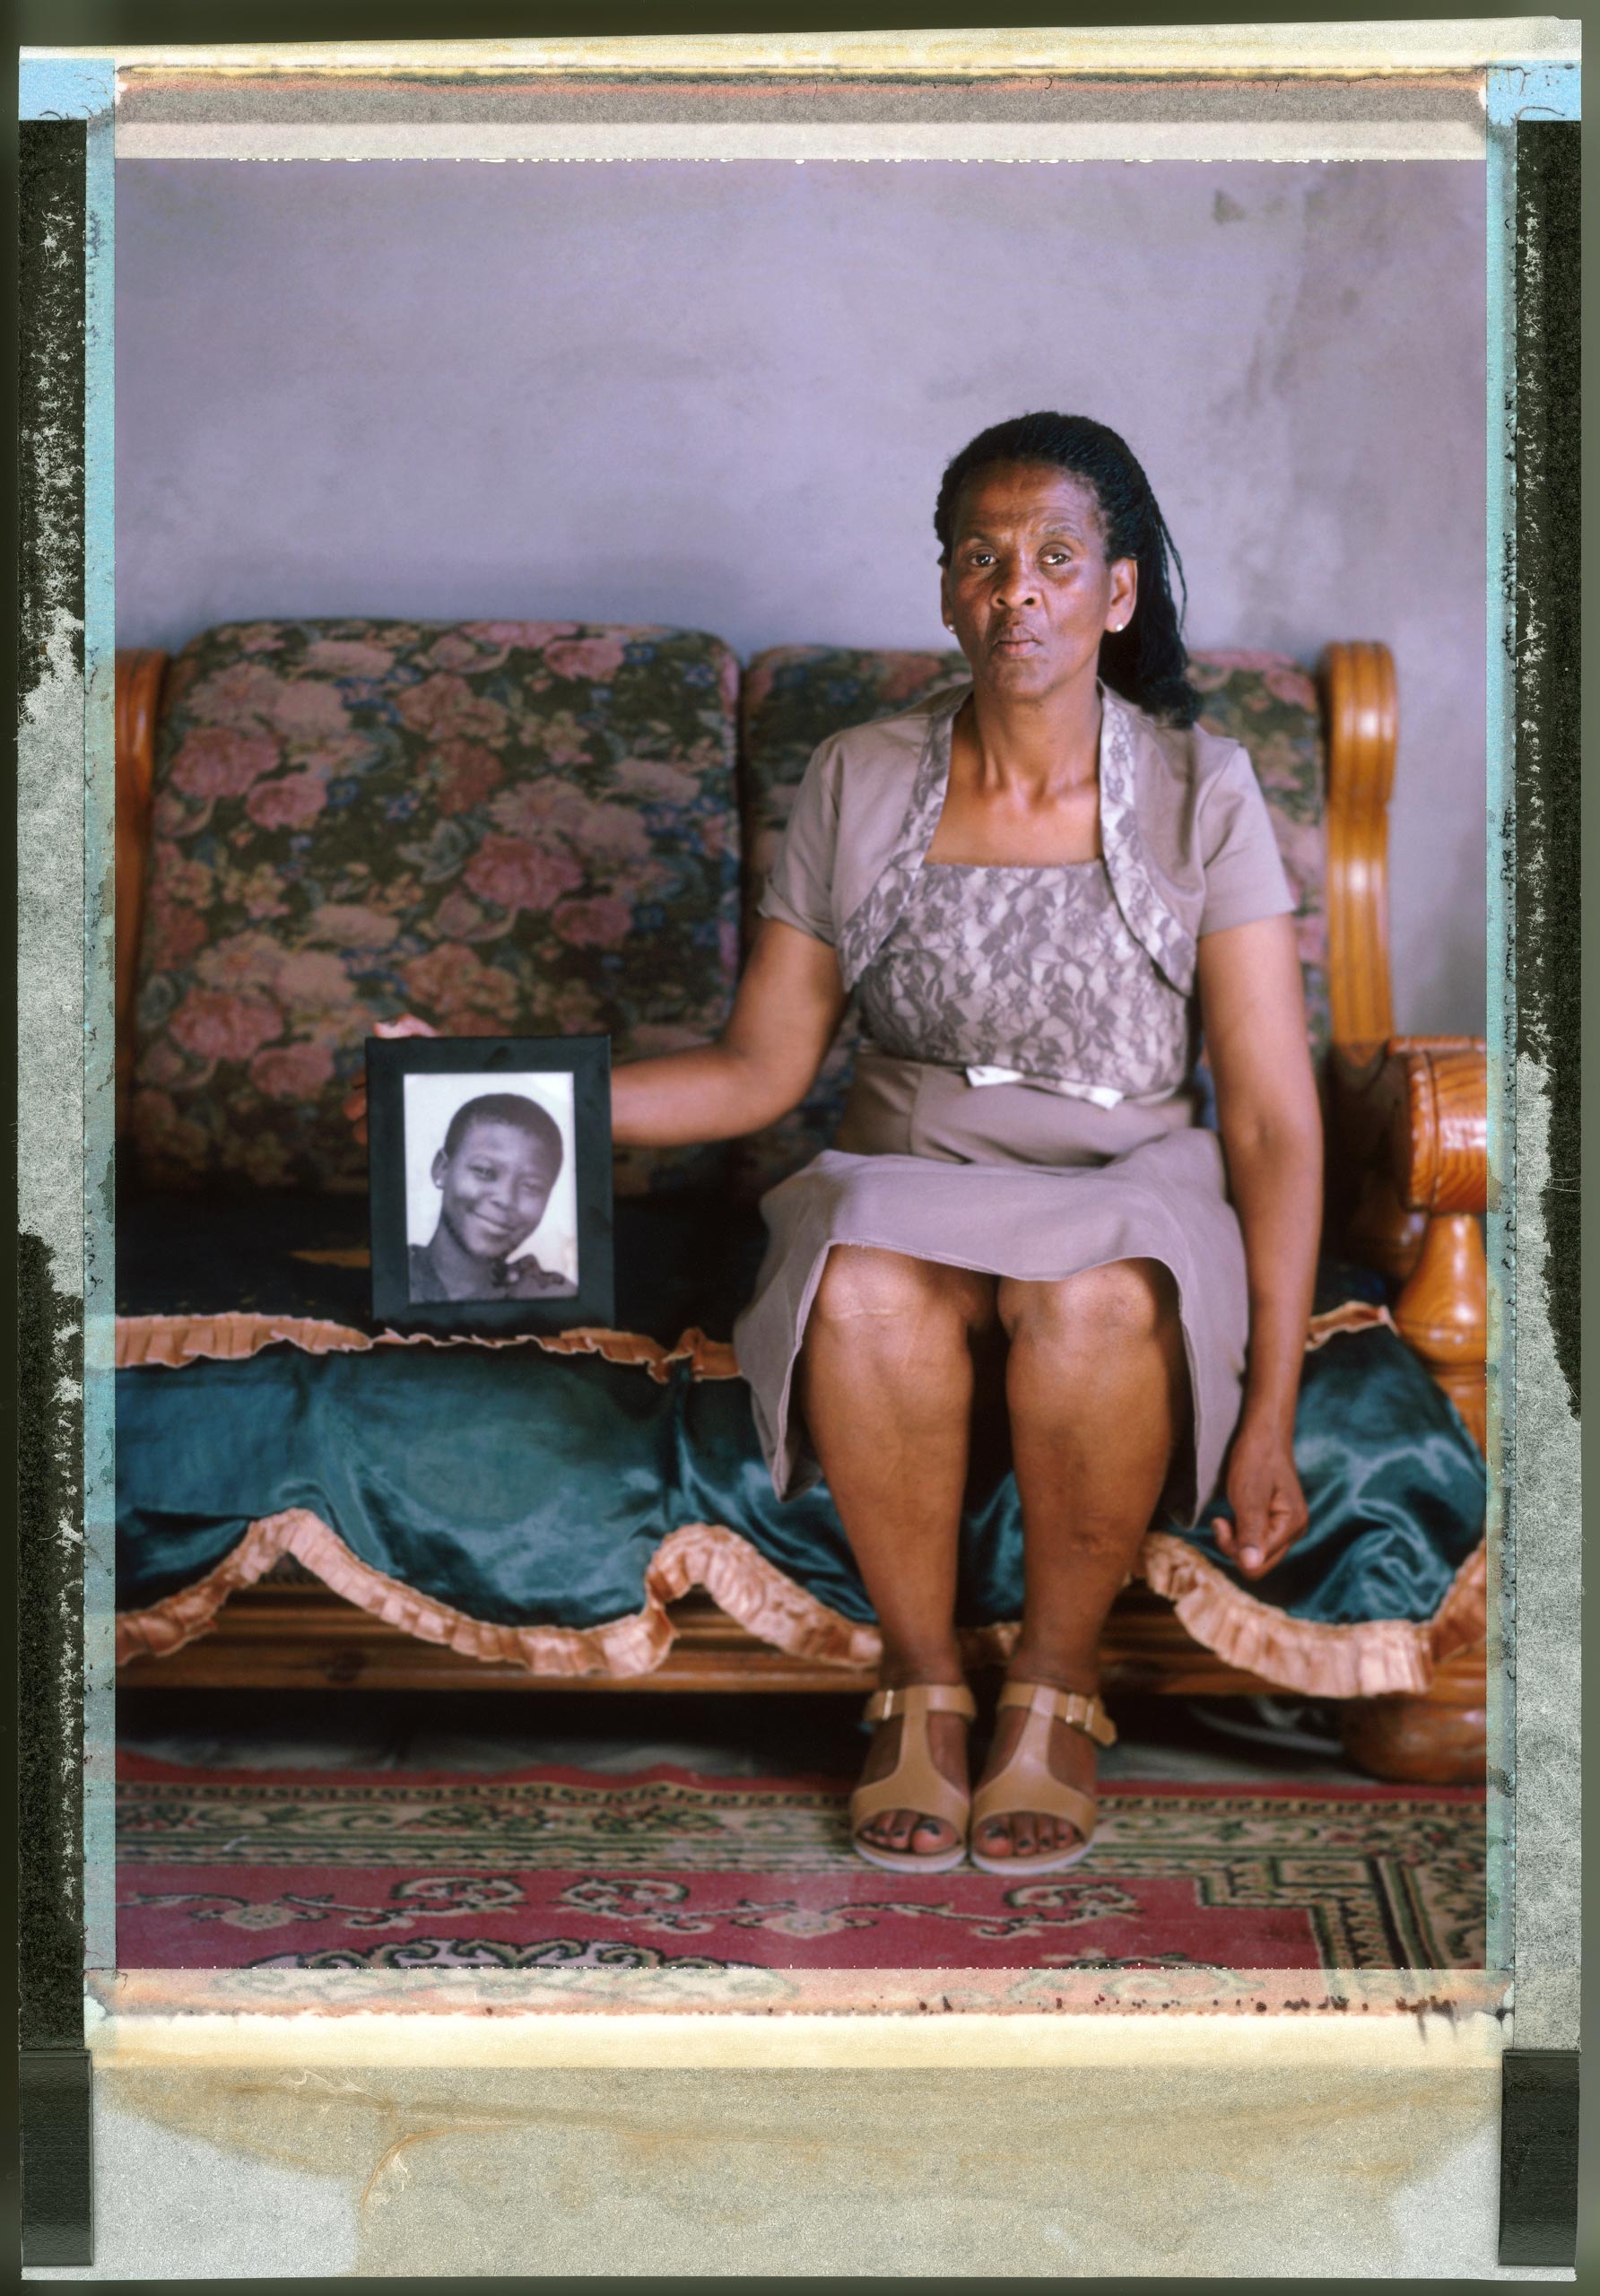 Boniwe Tyatyeka
                              Cape Town, South Africa, Nov. 2014
                              Boniwe Tyatyeka holds a framed photograph of her daughter Nontsikelelo (also called Ntsikie) who disappeared in September 2010. One year later, her decomposed body was found in a neighbor’s dustbin; she had been raped, beaten and strangled to death. According to Tyatyeka, the neighbor said he had done it to change her because she was a lesbian.
                              
                              South Africa was the first country on the continent to legalize same-sex marriage and its constitution guarantees LGBT rights, but social stigma around homosexuality remains. “Nitsikie was a child with dreams,” Boniwe says. “Even now when I’m on the go, I am always looking out like I will hopefully see Ntsikie.”